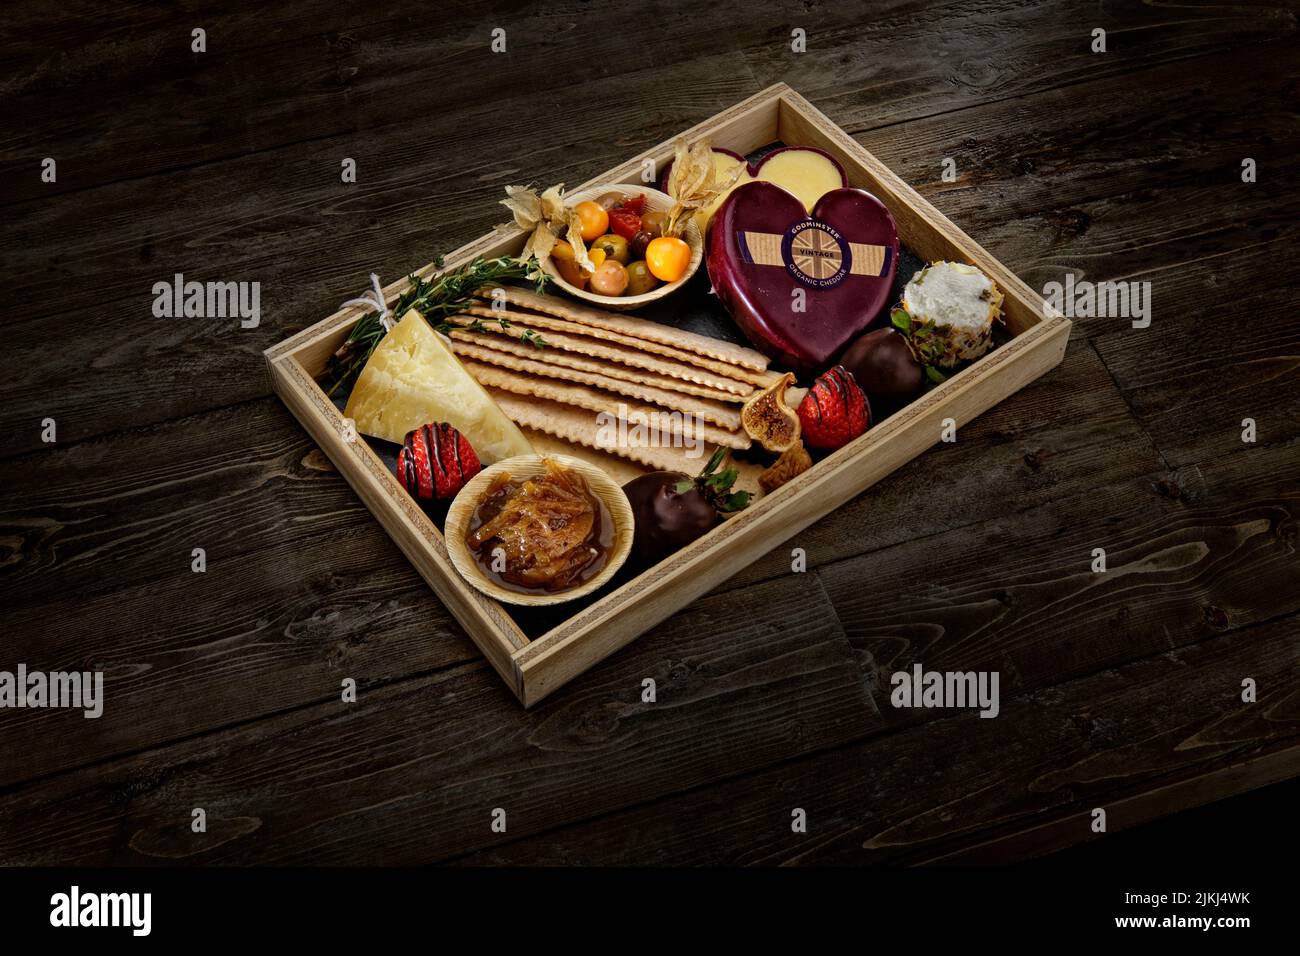 A closeup of a delicious Charcuterie board with crackers, cheeses and cured meats on a wooden platter Stock Photo